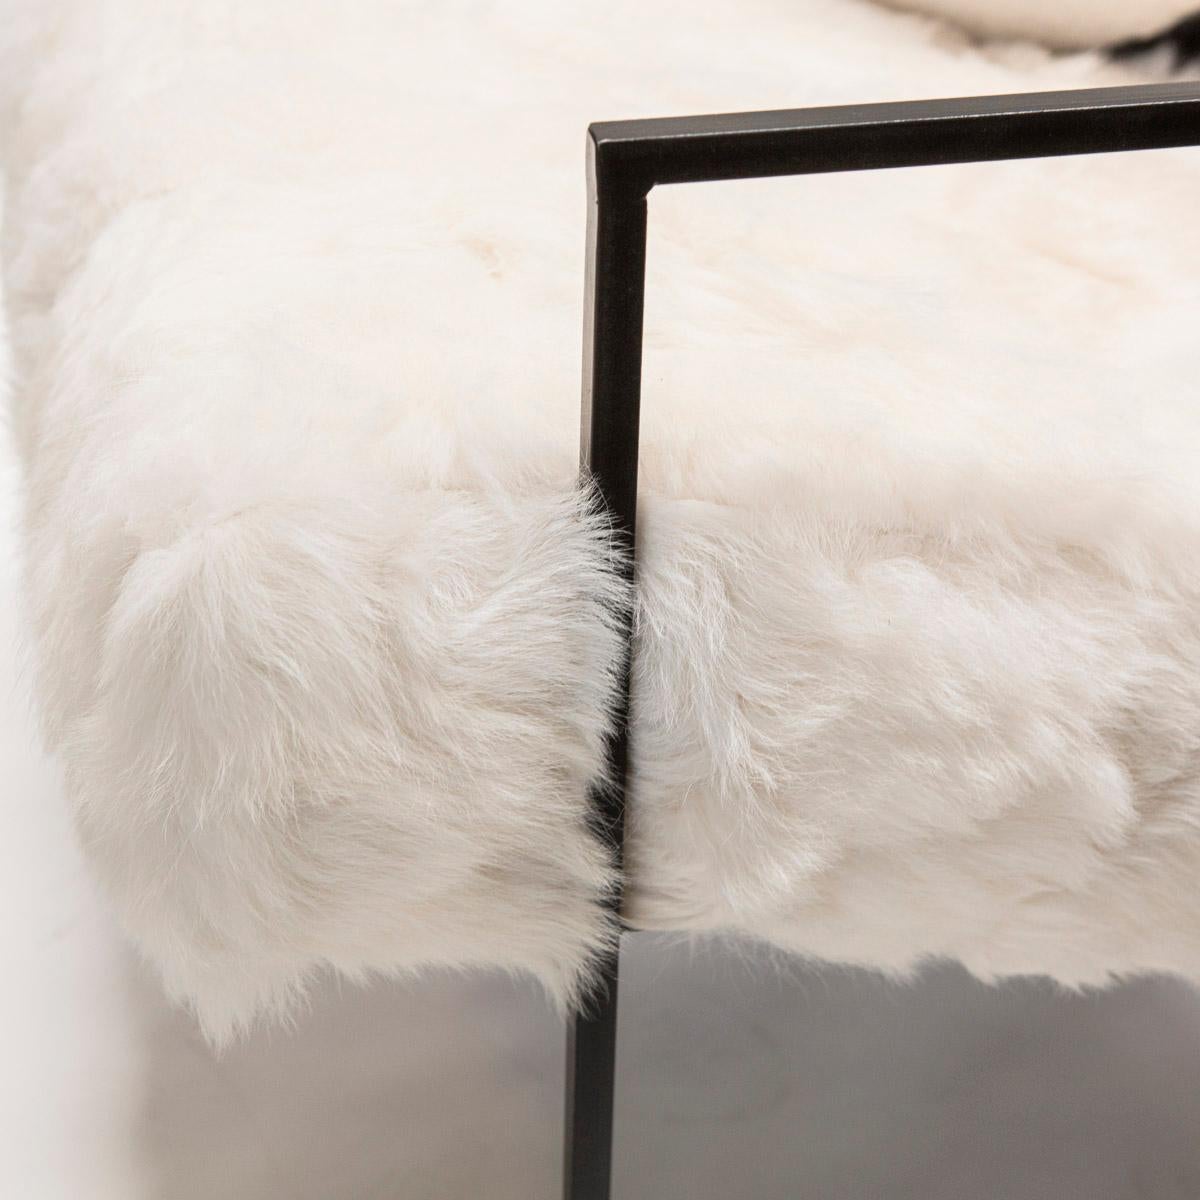 The Ziggy chair is a solid metal steel frame offered in black matte or brass colors and is the perfect showcase for JG SWITZER's custom made Upcycled, real sheep fur. 

Please allow for natural hide differences, each chair will be slightly unique,